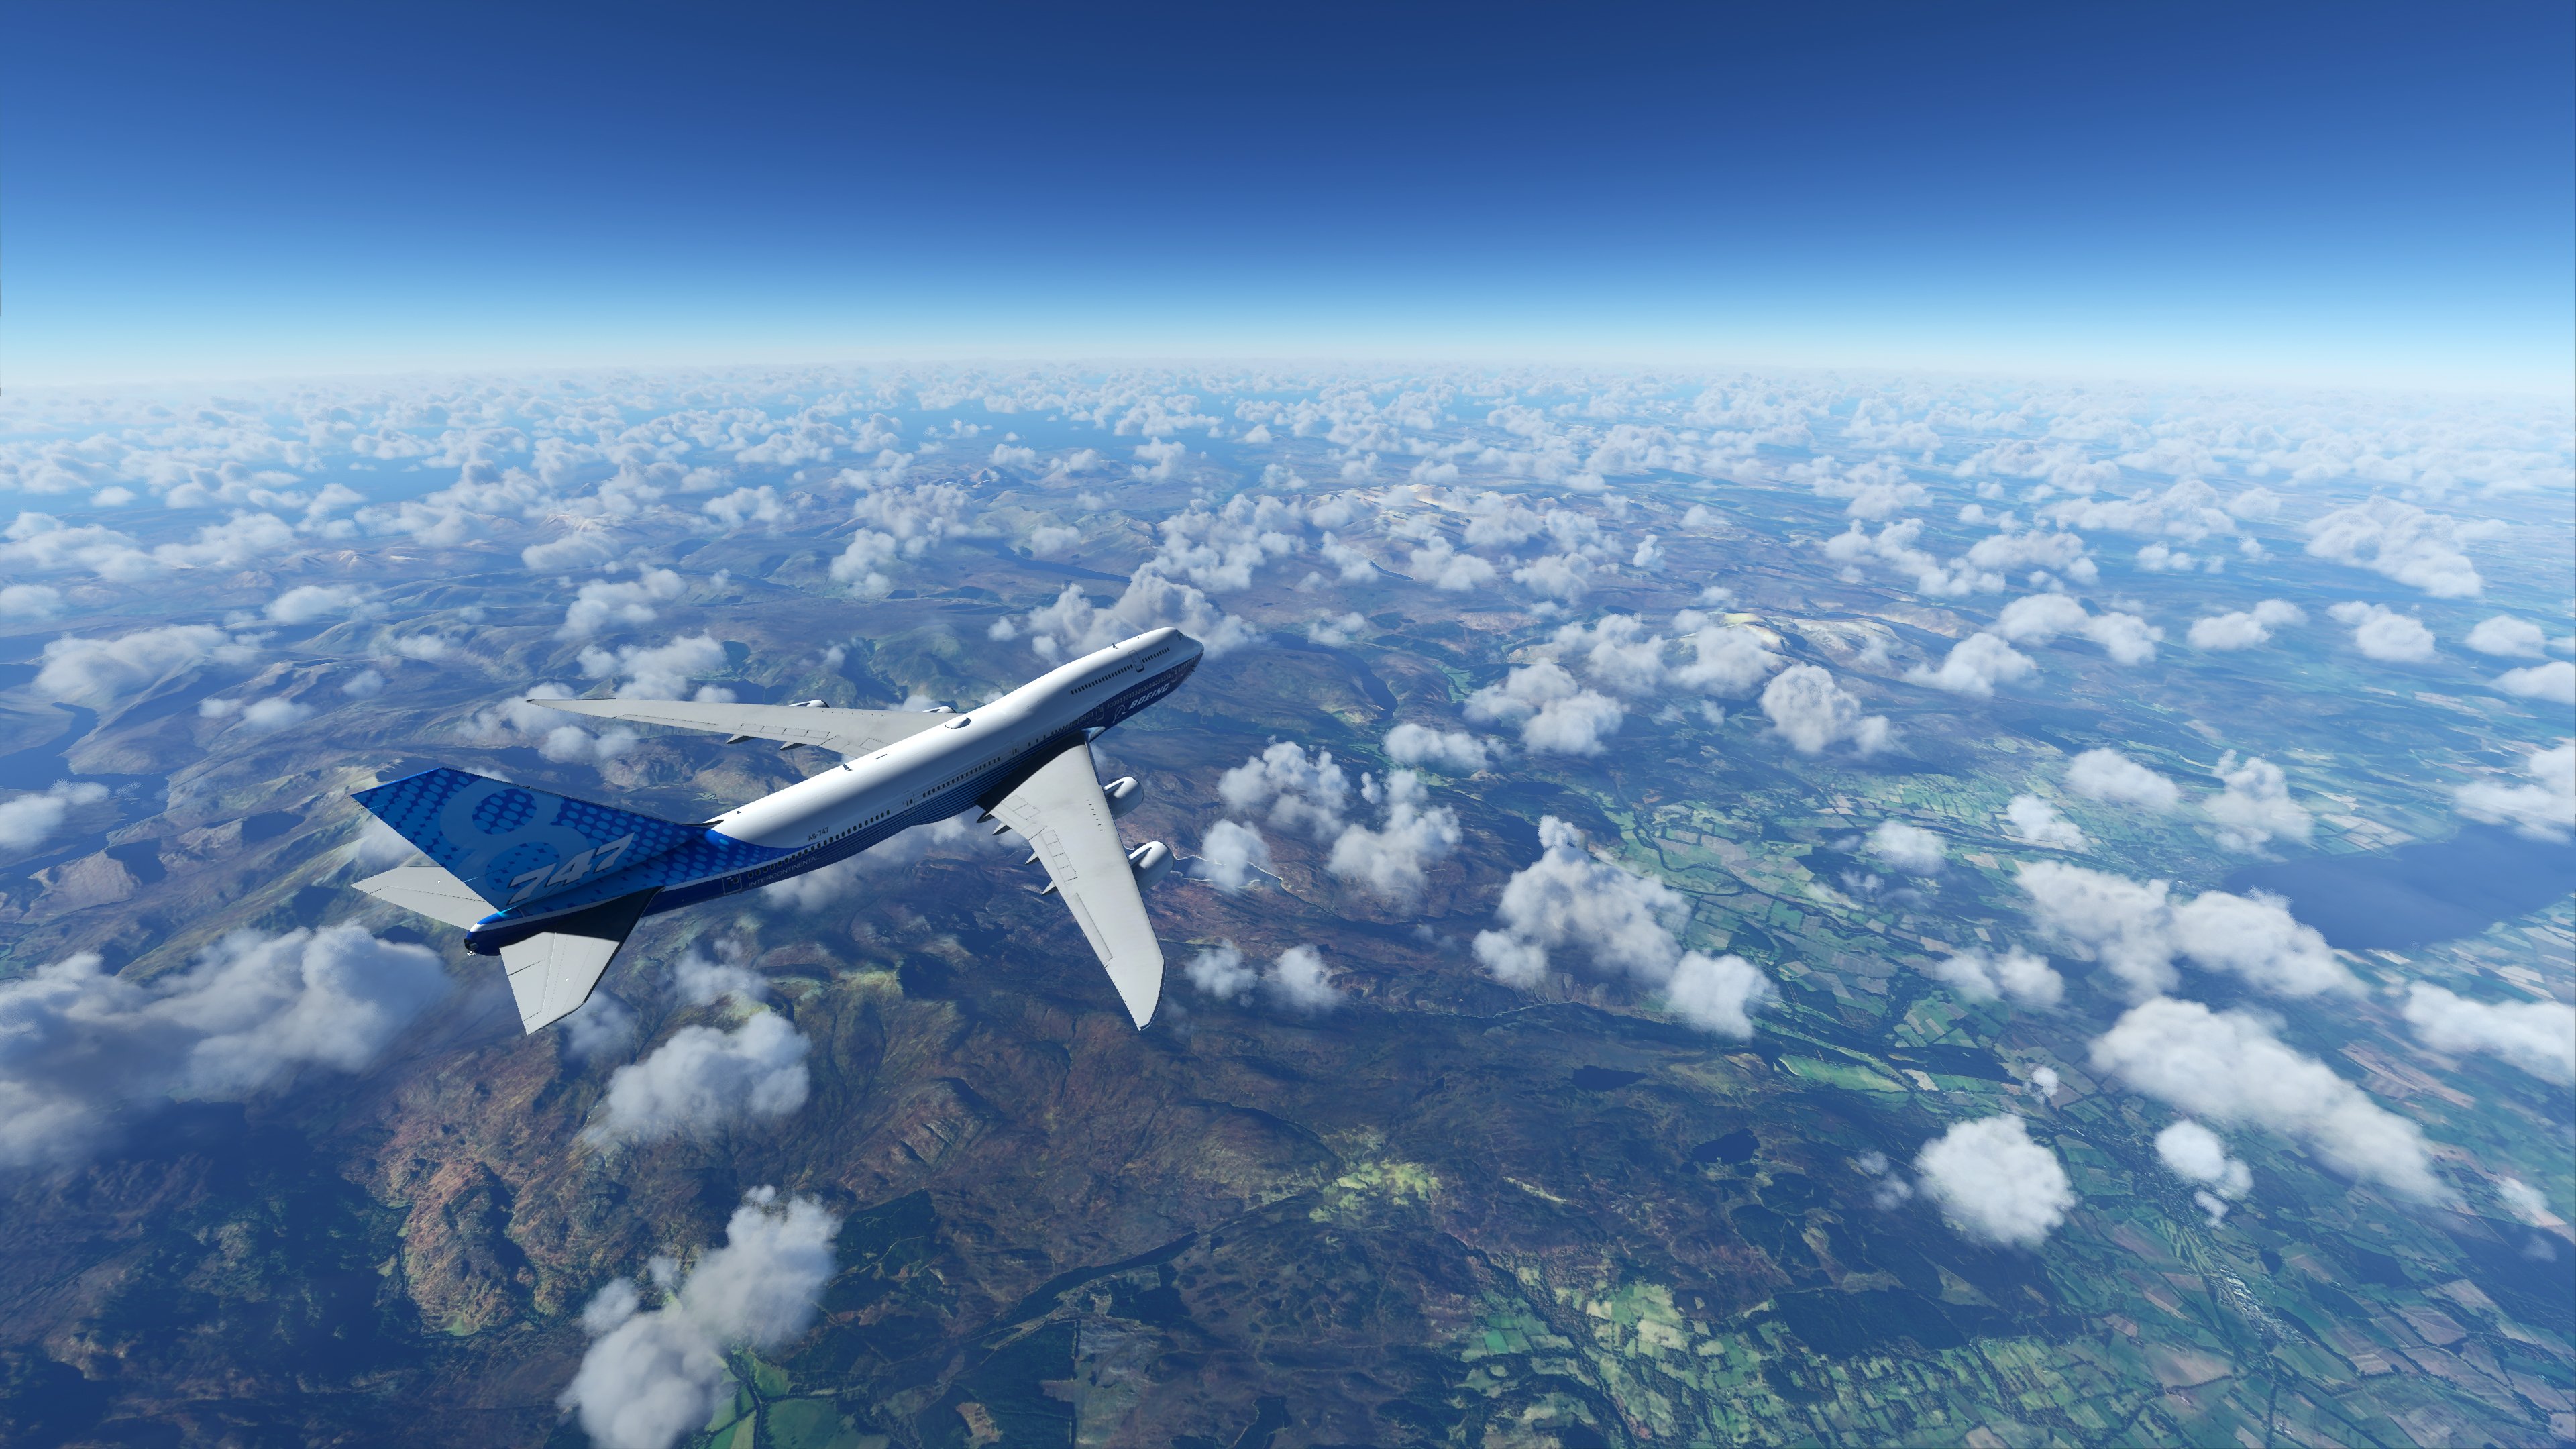 Here are some 4K screenshots I took while playing the absurdly beautiful Microsoft Flight Simulator